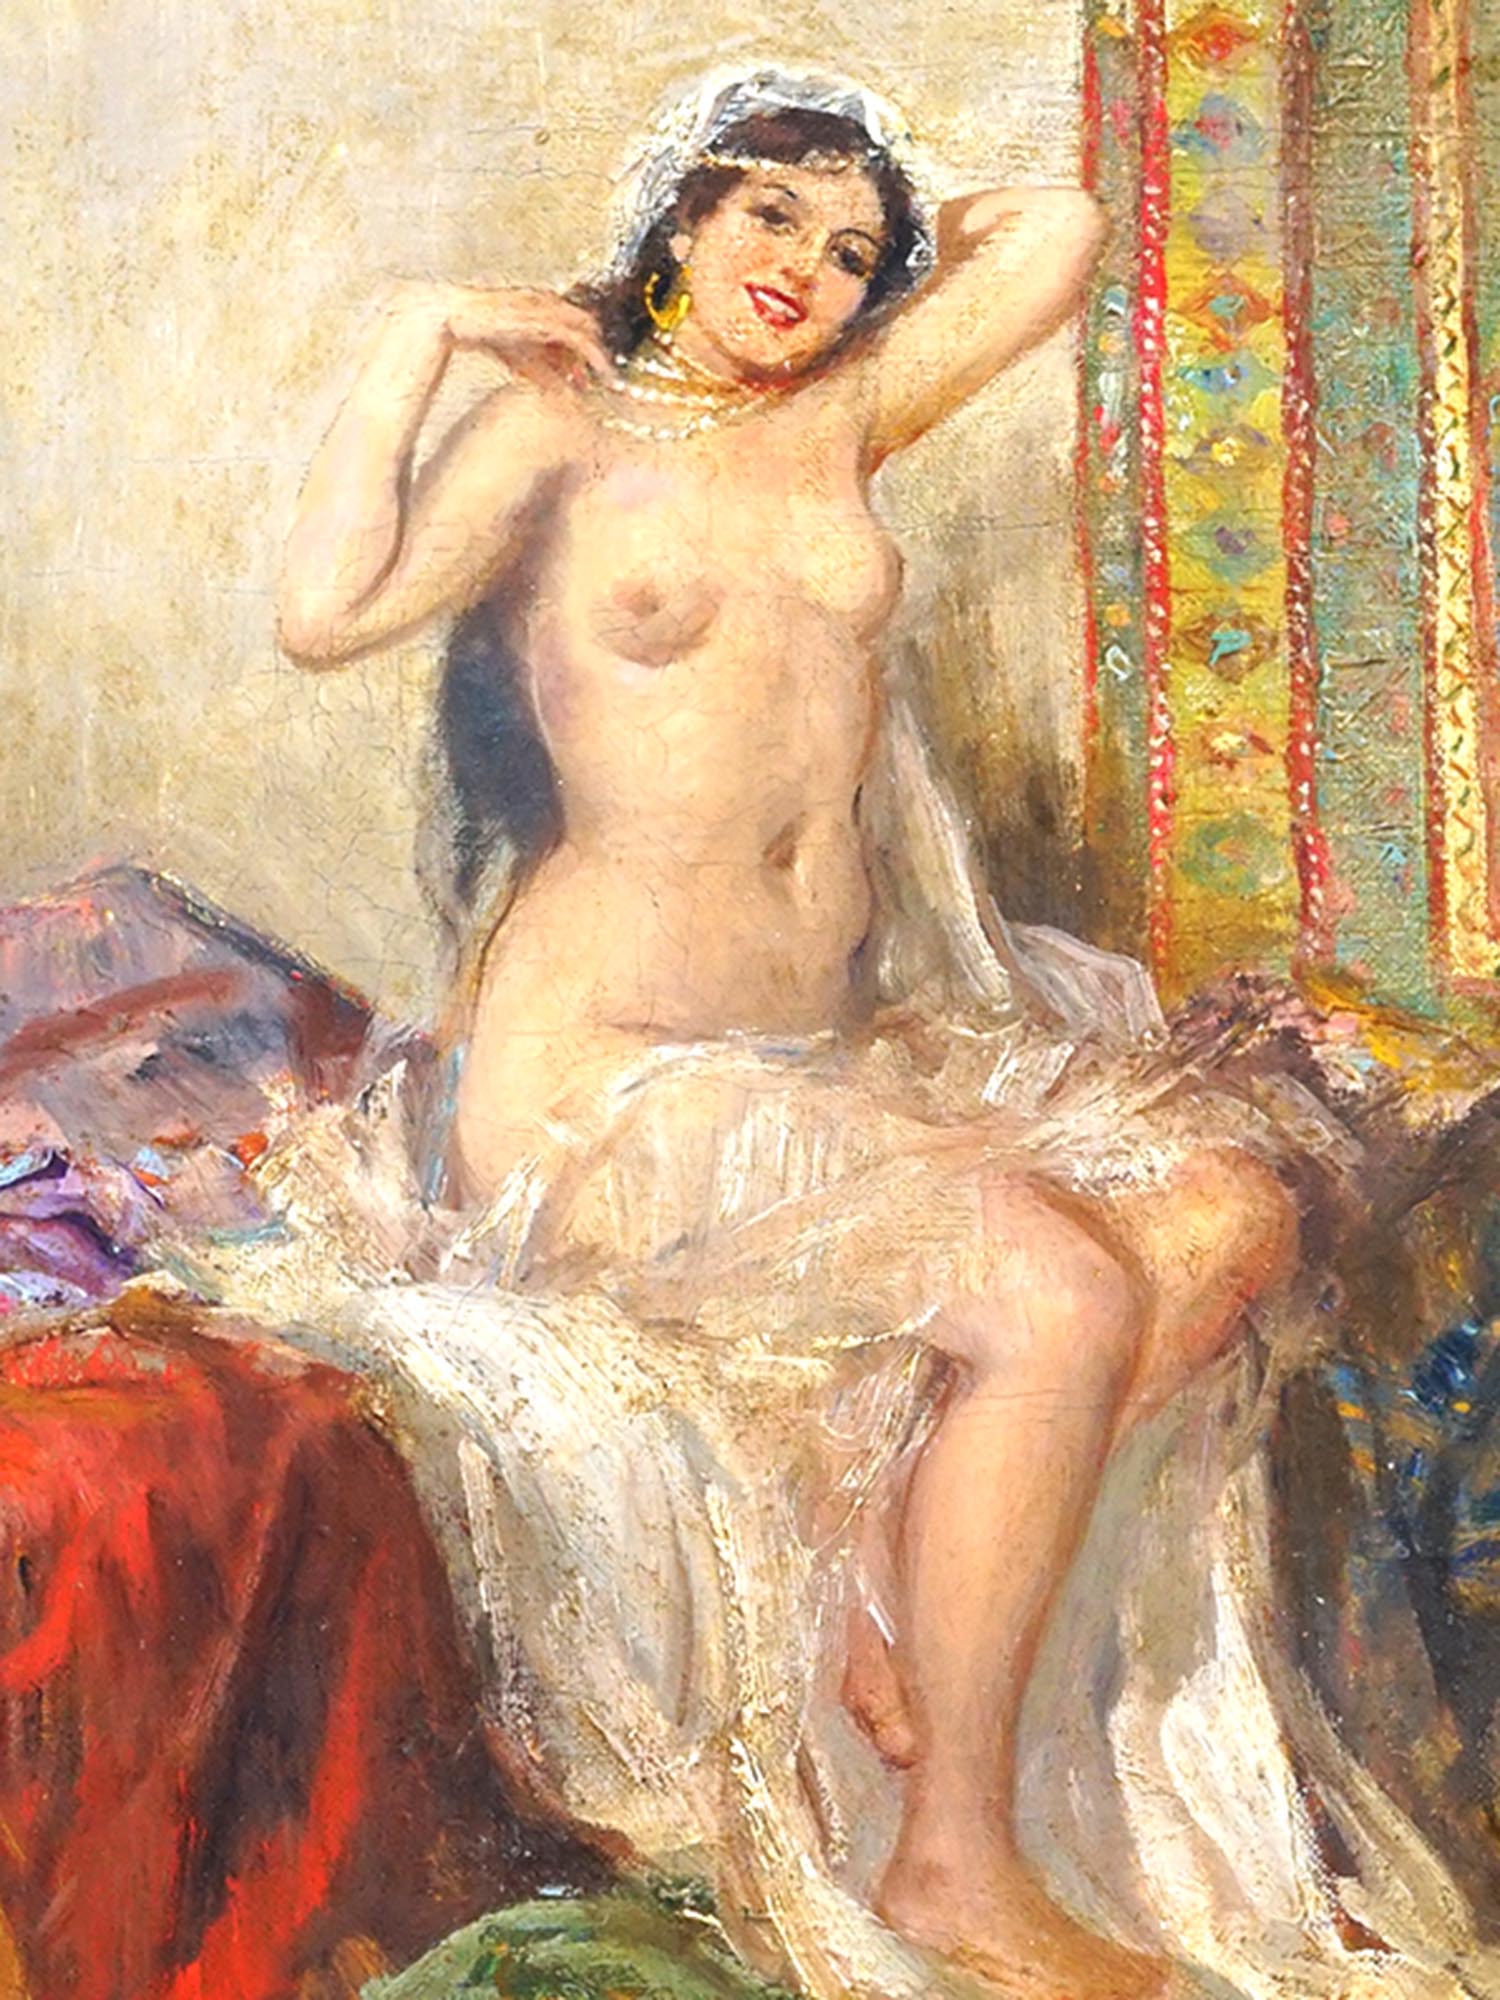 ANTIQUE ORIENTALIST NUDE OIL PAINTING BY FABIO FABBI PIC-1